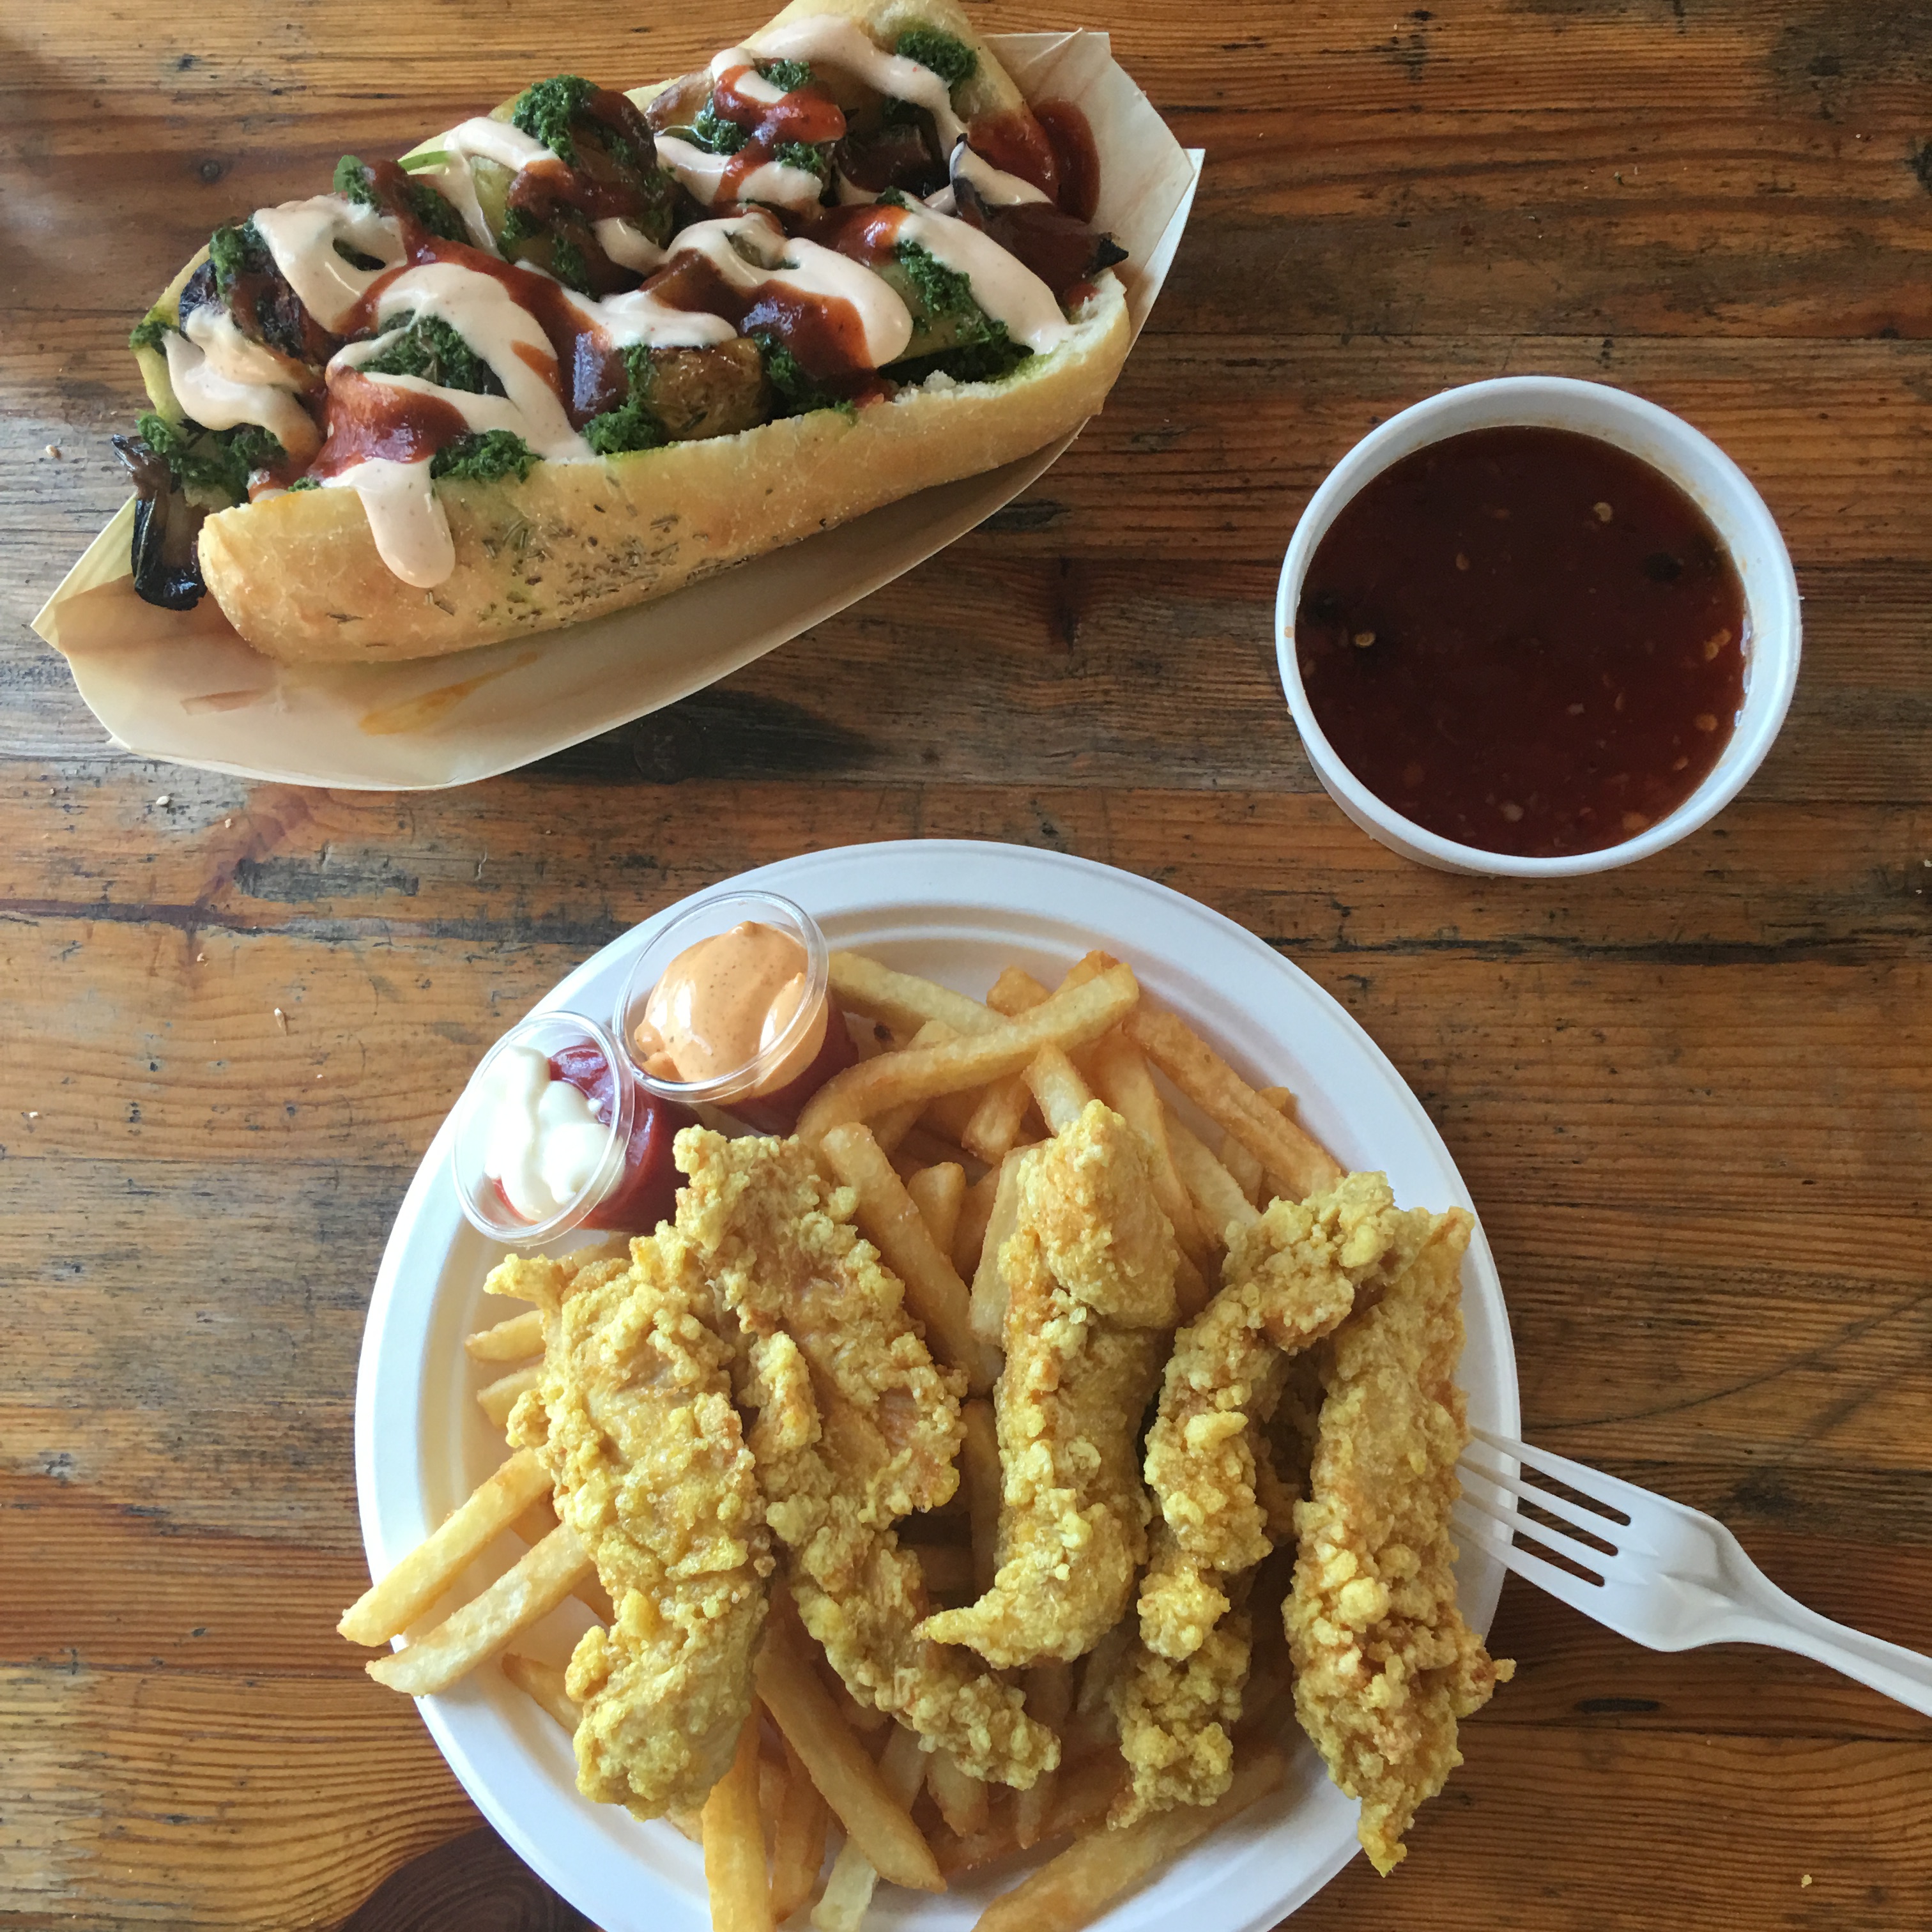 Hot dogs and crazy chicken